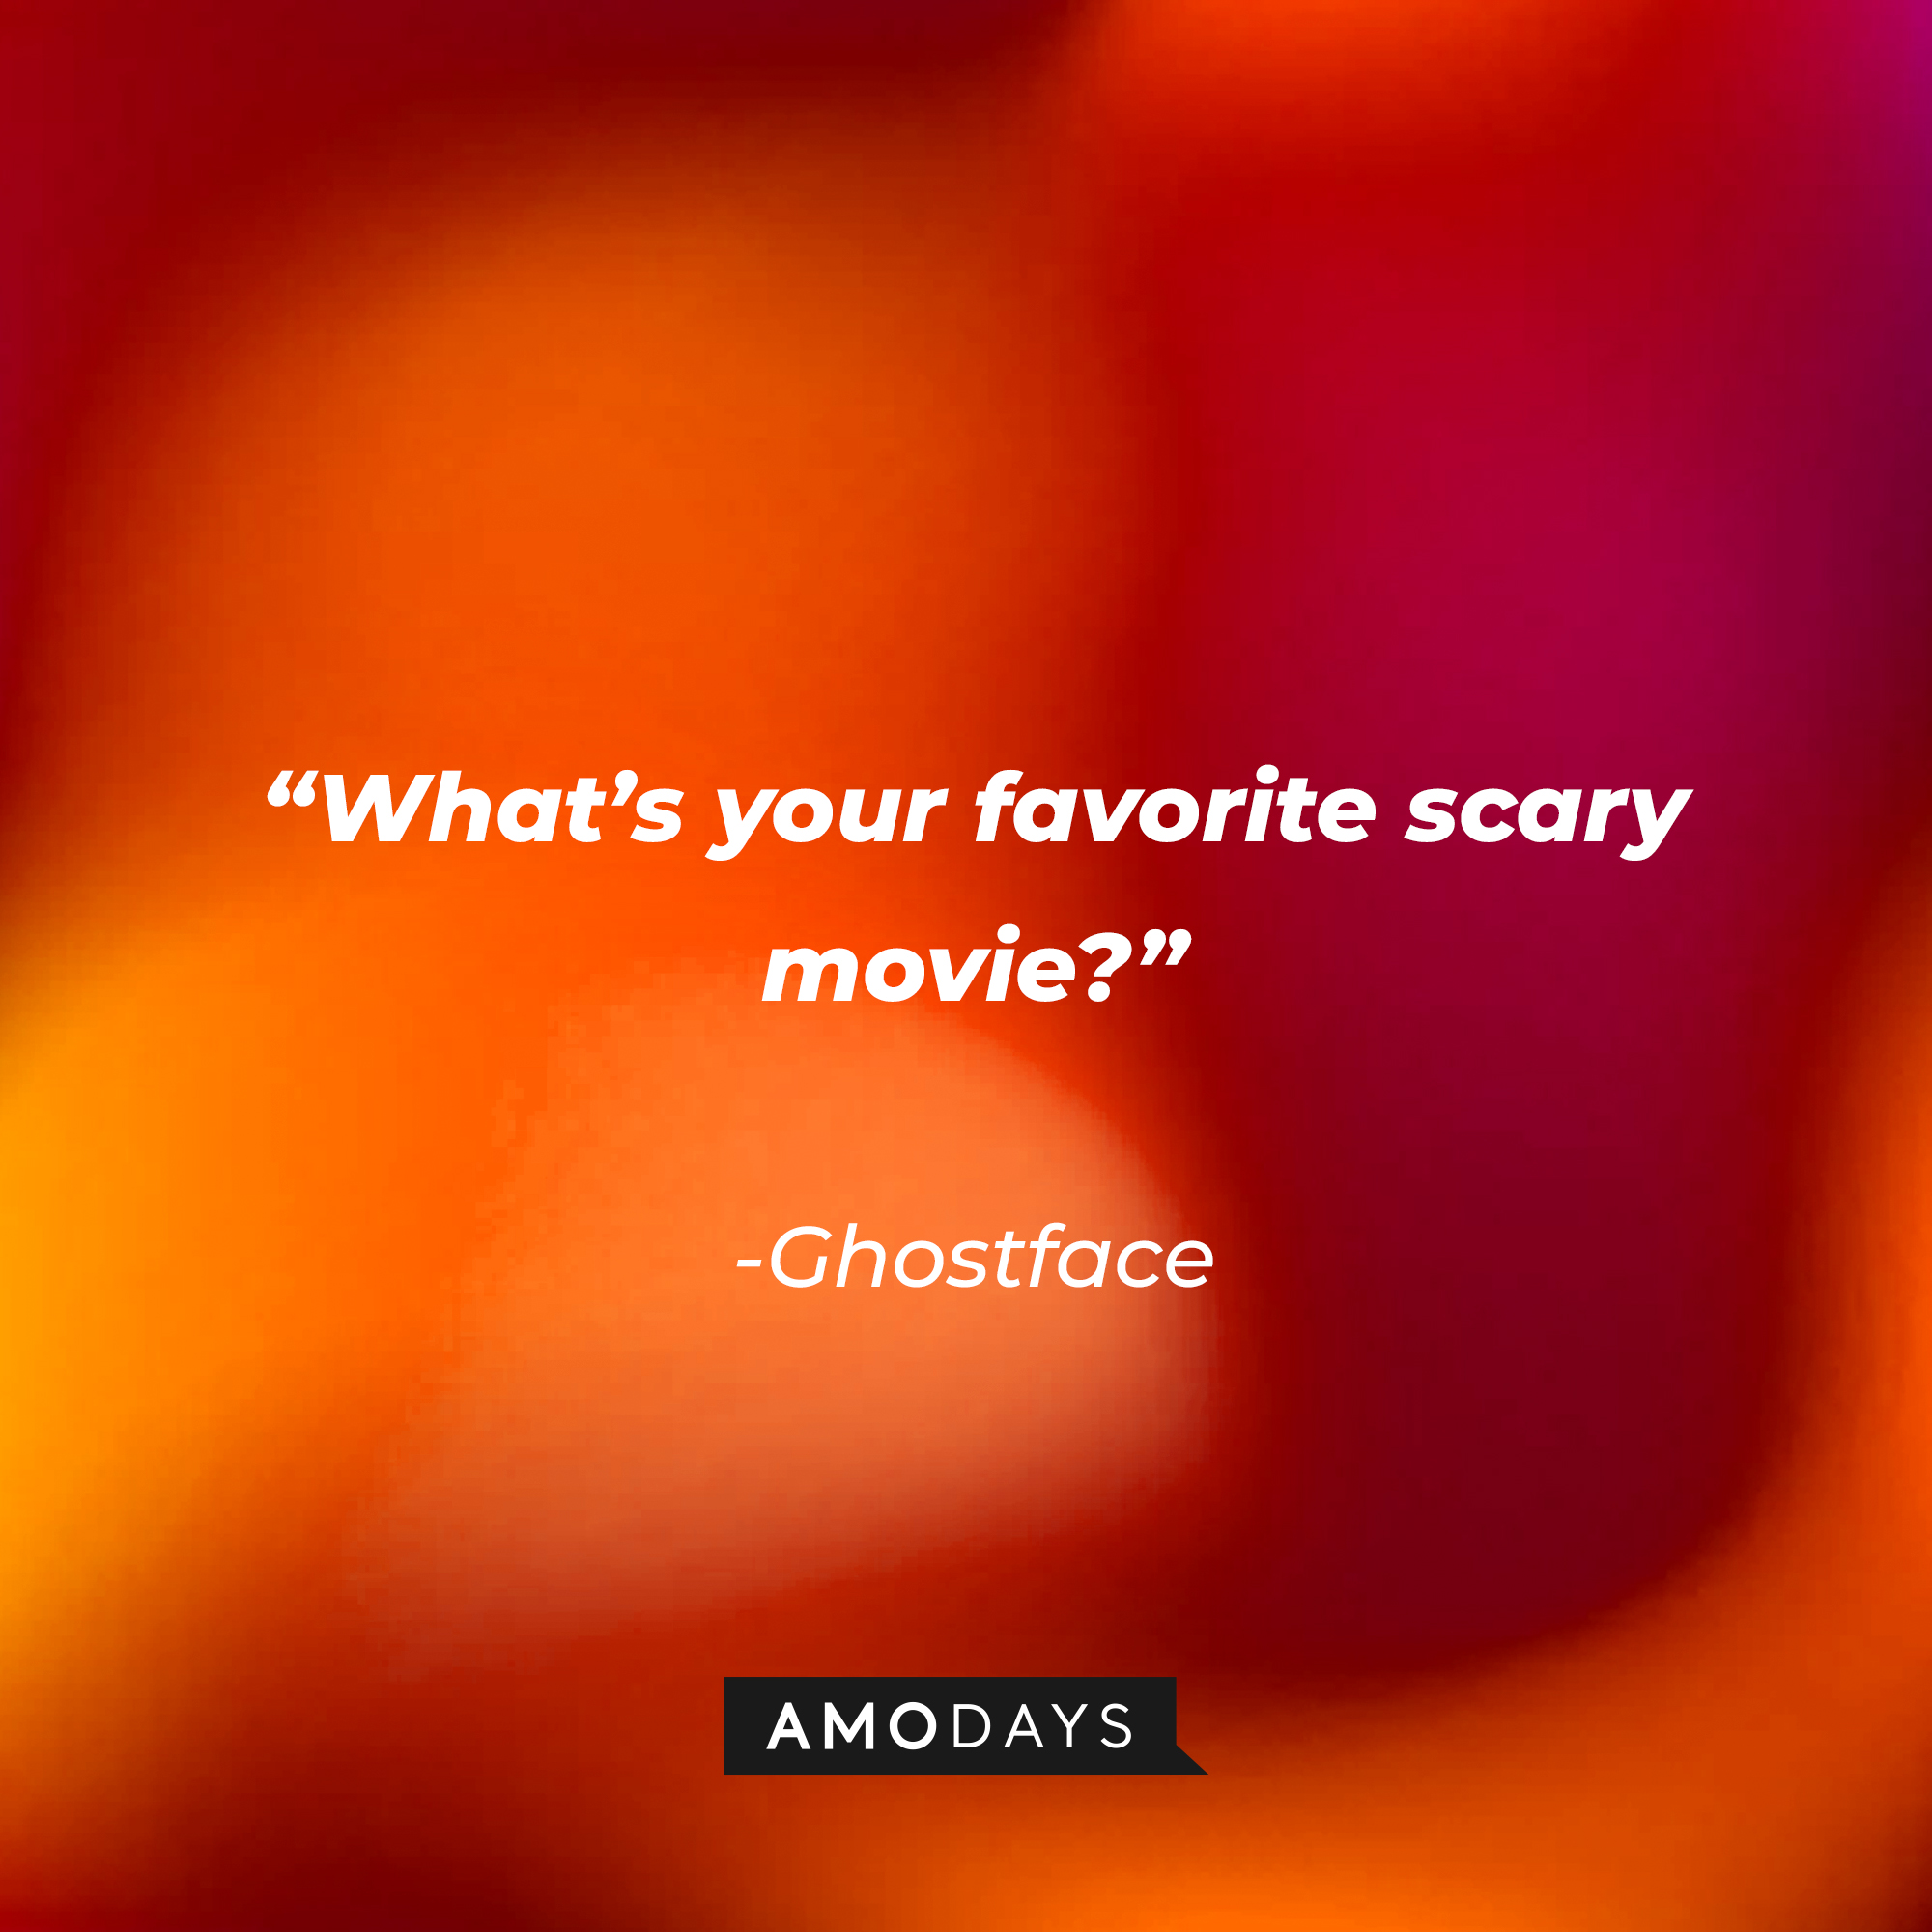 Ghostface’s quote from “Scream’ (2020)’”: “What’s your favorite scary movie?” | Source: AmoDays